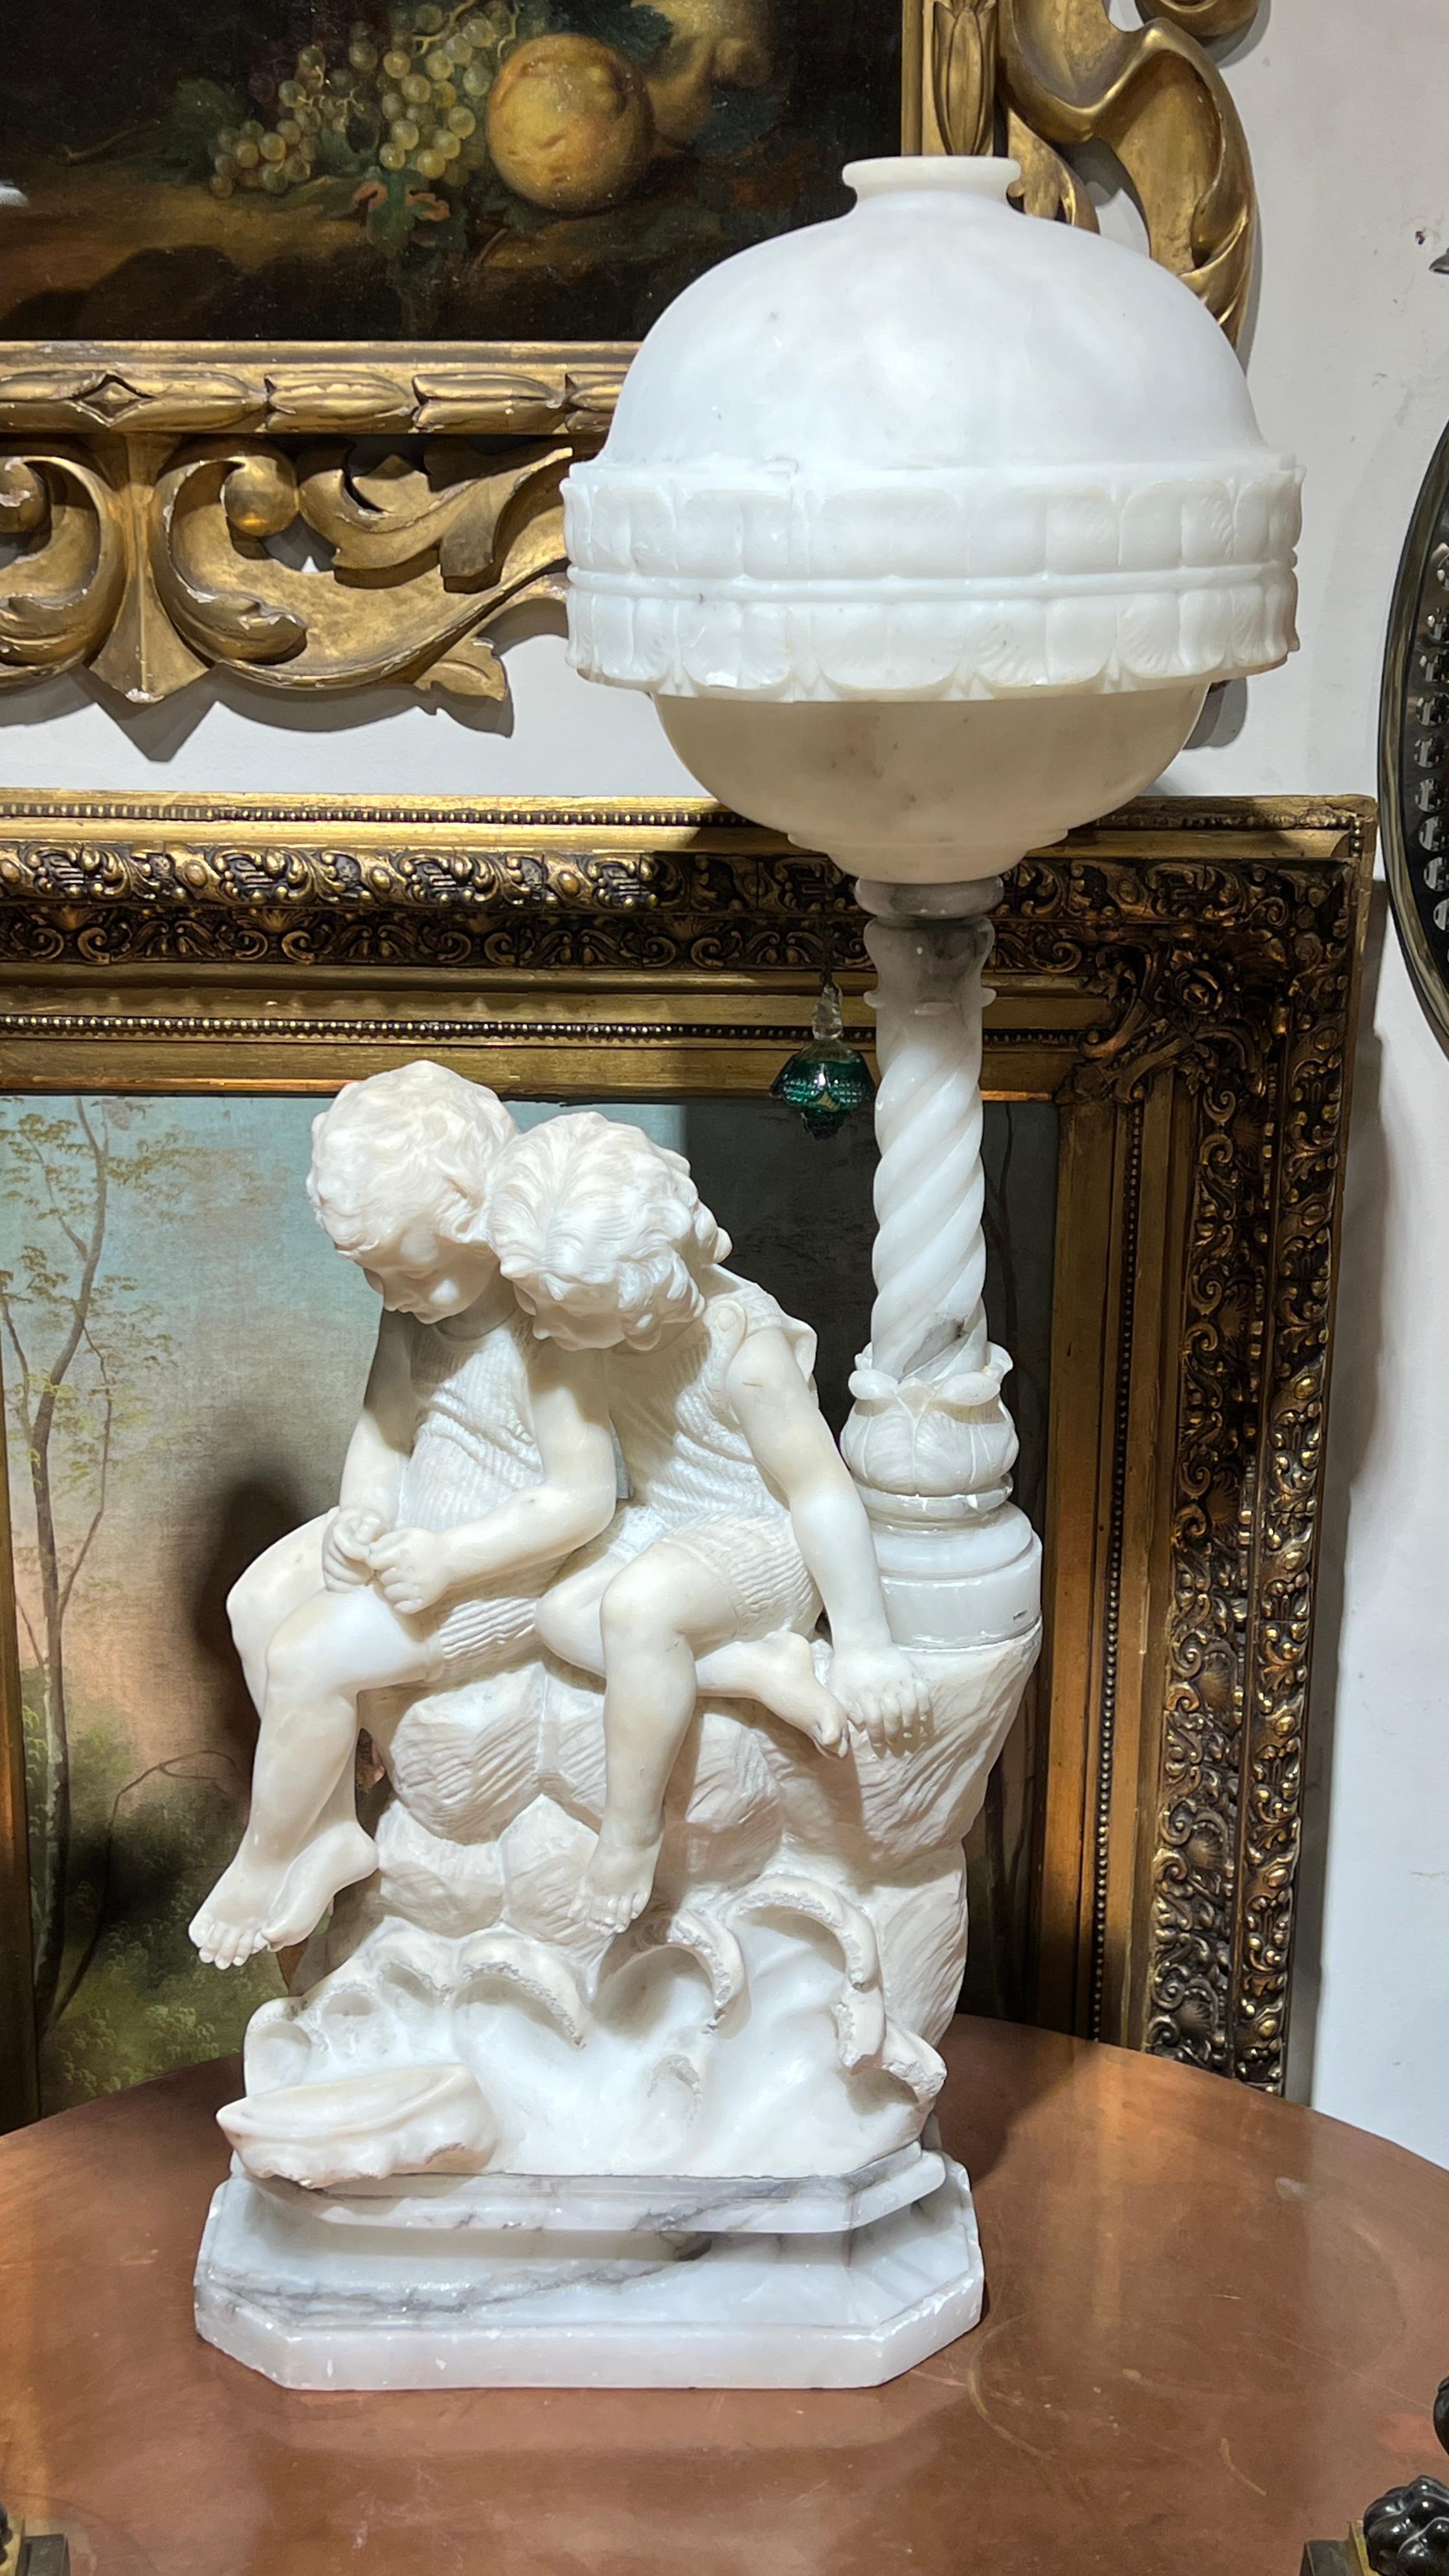 Delightful hand-carved alabaster lamp depicting young boy and girl, signed G Mascagni, attributed to the Italian master, Gaspar Mascagni, active in the late 19th to early 20th century.